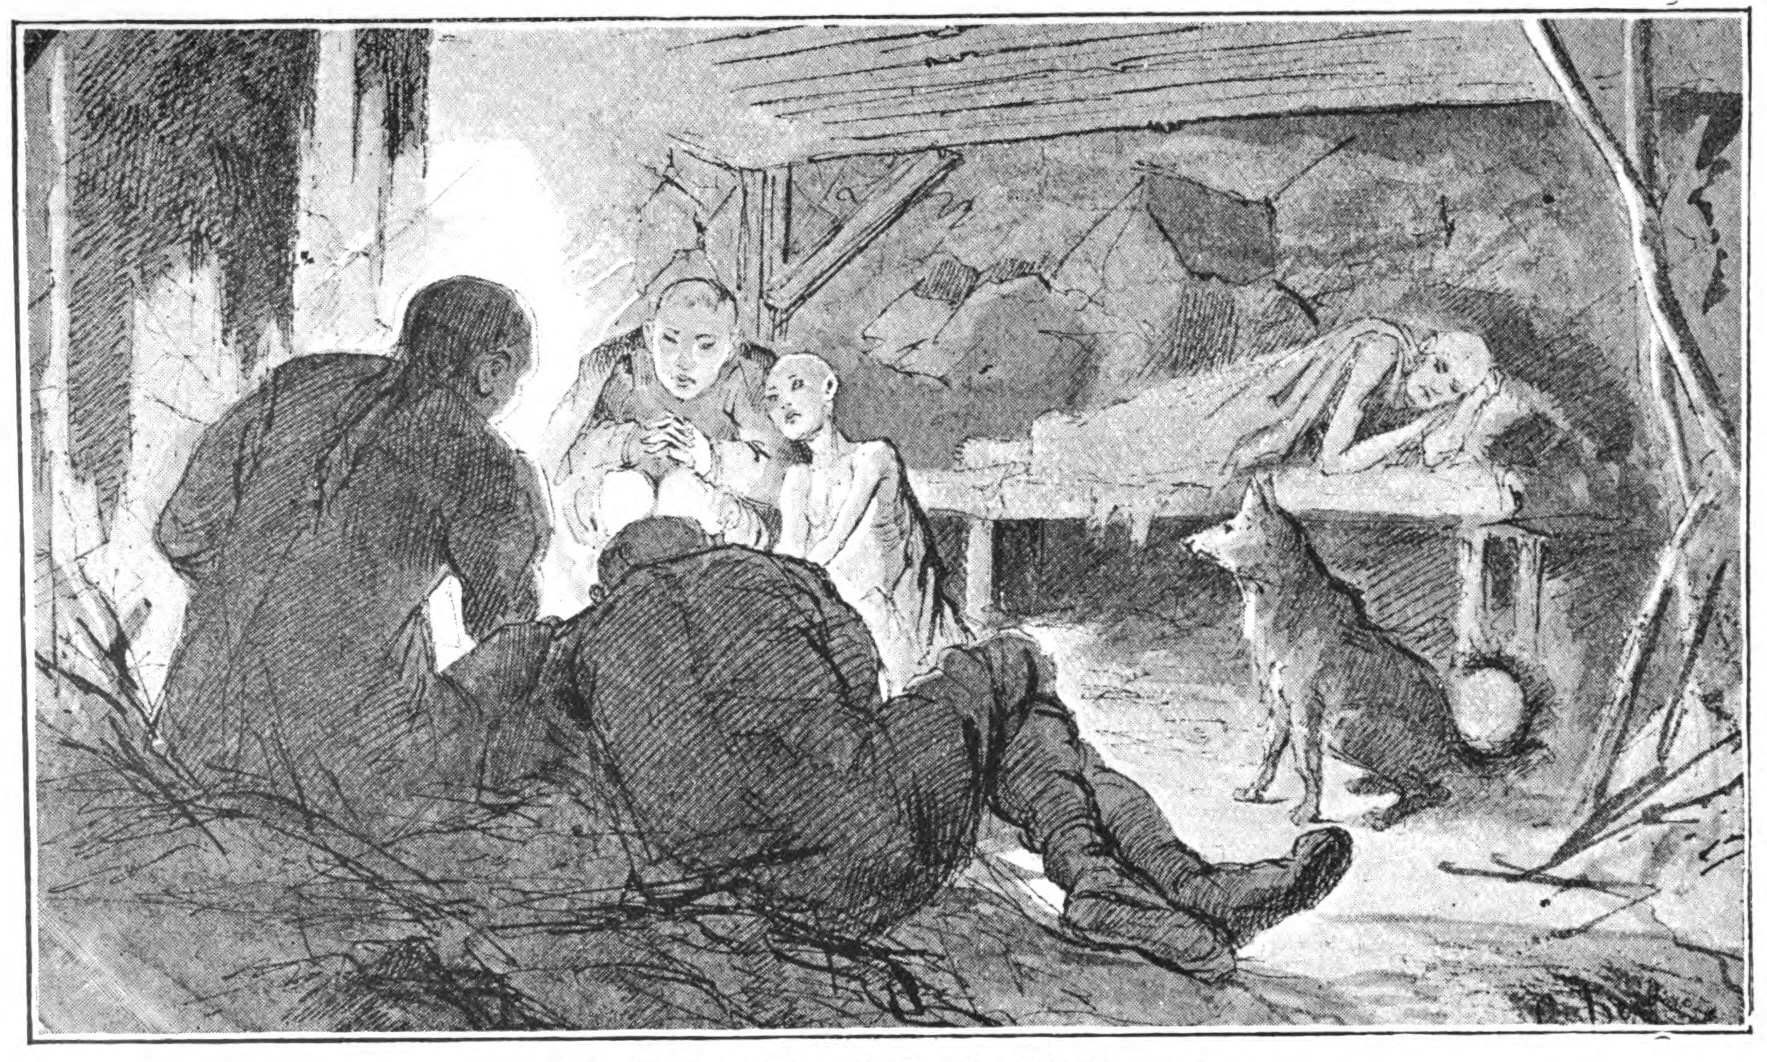 emaciated and crippled people lying on the floor and a bench in a hut, a dog nearby